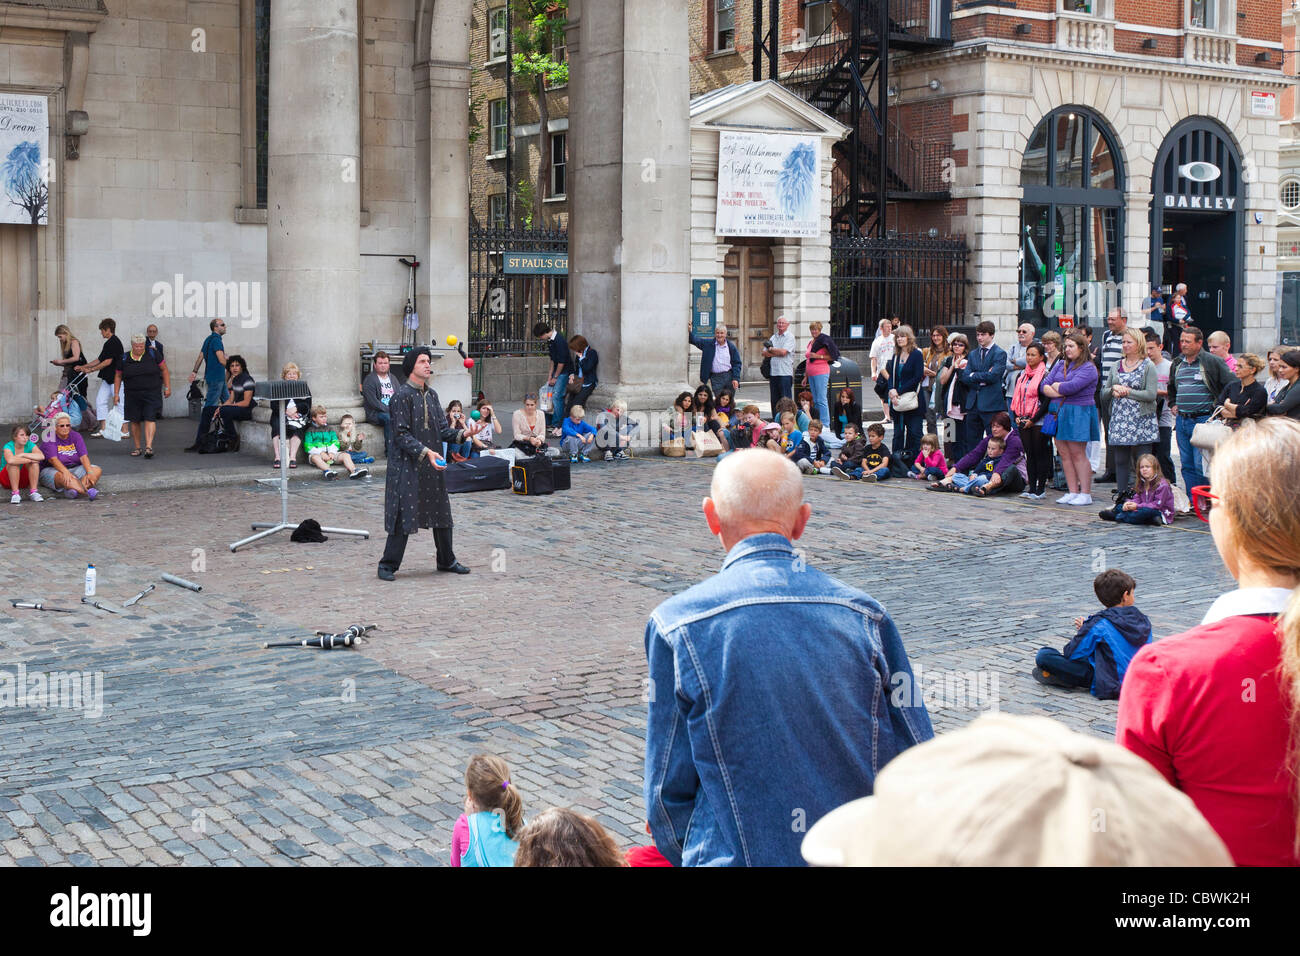 Tourists, shoppers and a street performer at Covent Garden, London, England. Stock Photo